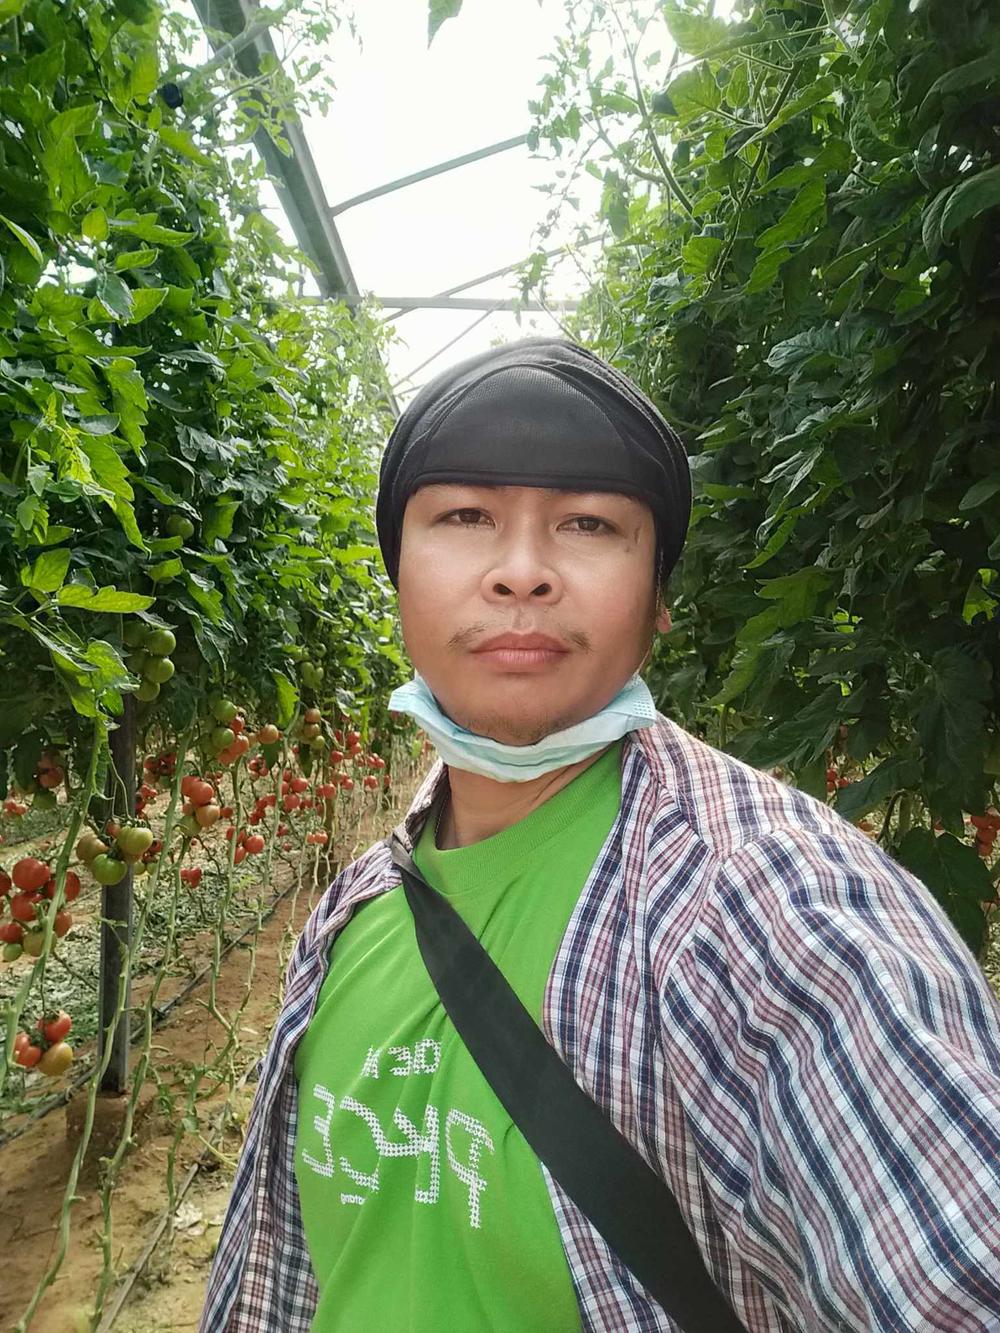 Phairin Phuangsri, a Thai agricultural laborer working in Israel, says he feels safe where he works, about 60 miles away from the Gaza Strip. Phuangsri plans to remain in Israel despite last month's Hamas attack.